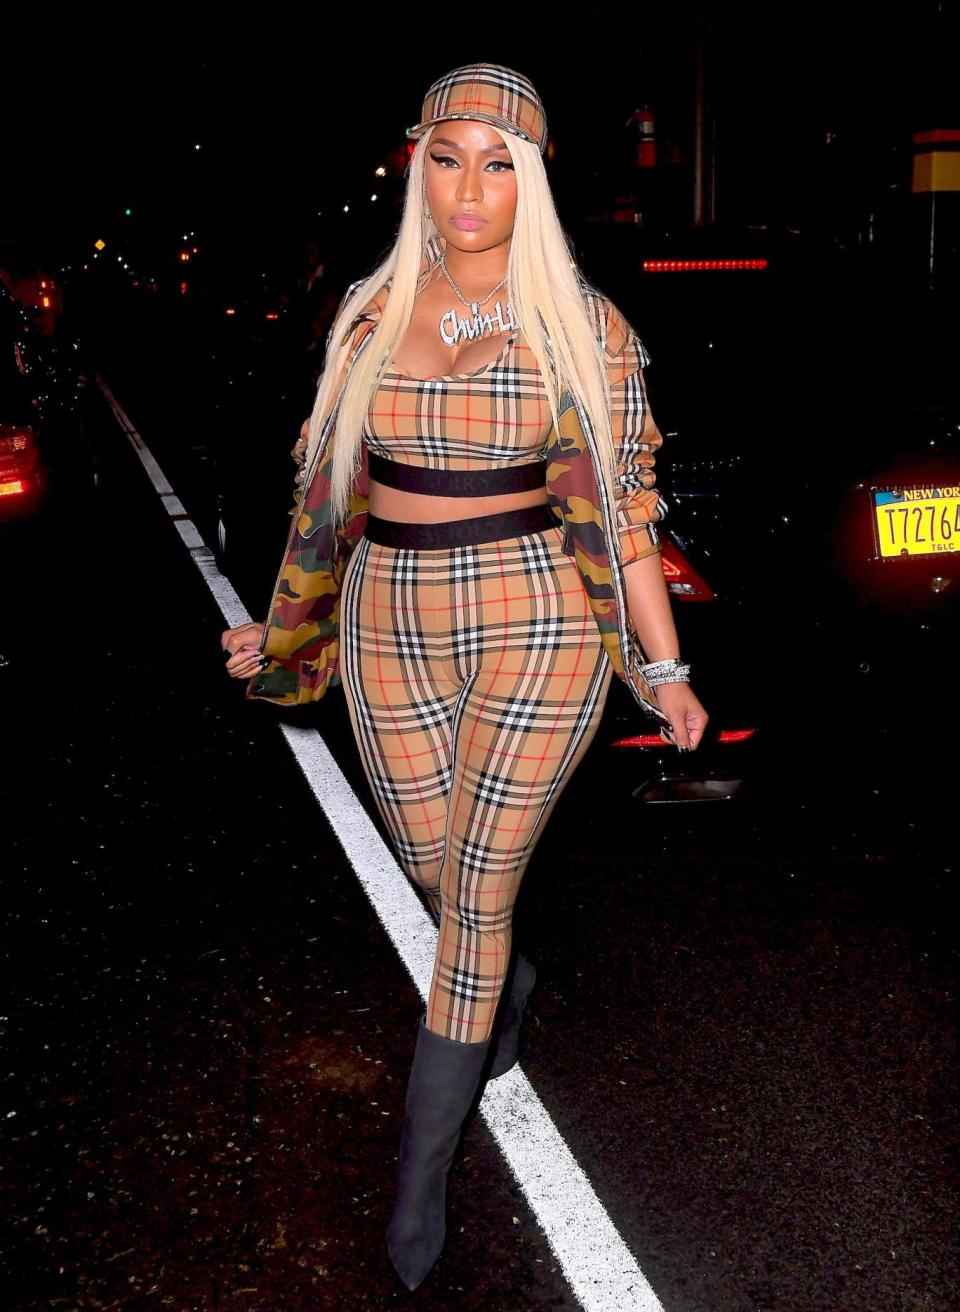 Nicki Minaj was spotted out in New York wearing head-to-toe Burberry (247PAPS.TV / SplashNews.com)